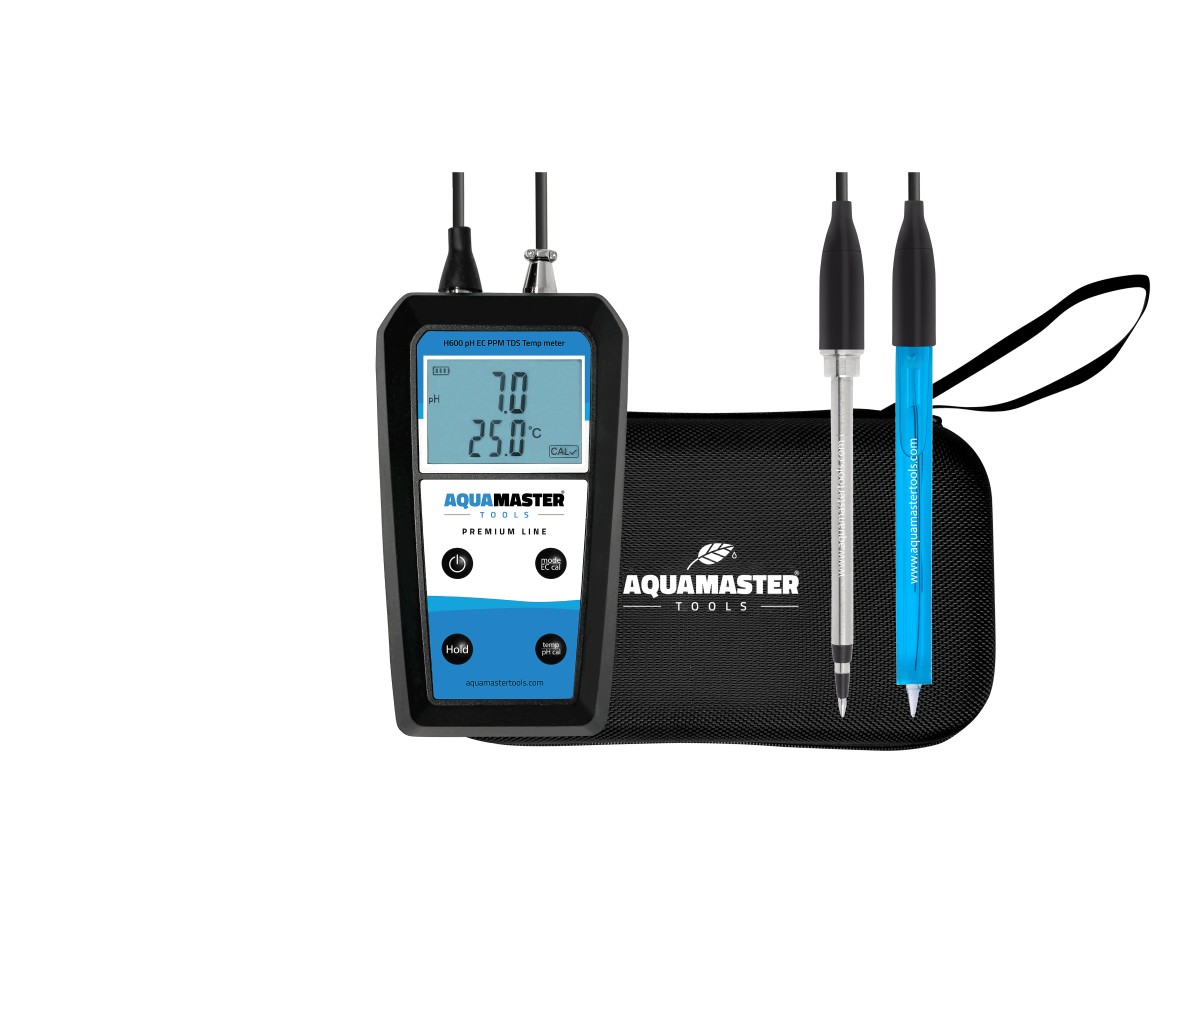 h600 prohandheld substrate meter